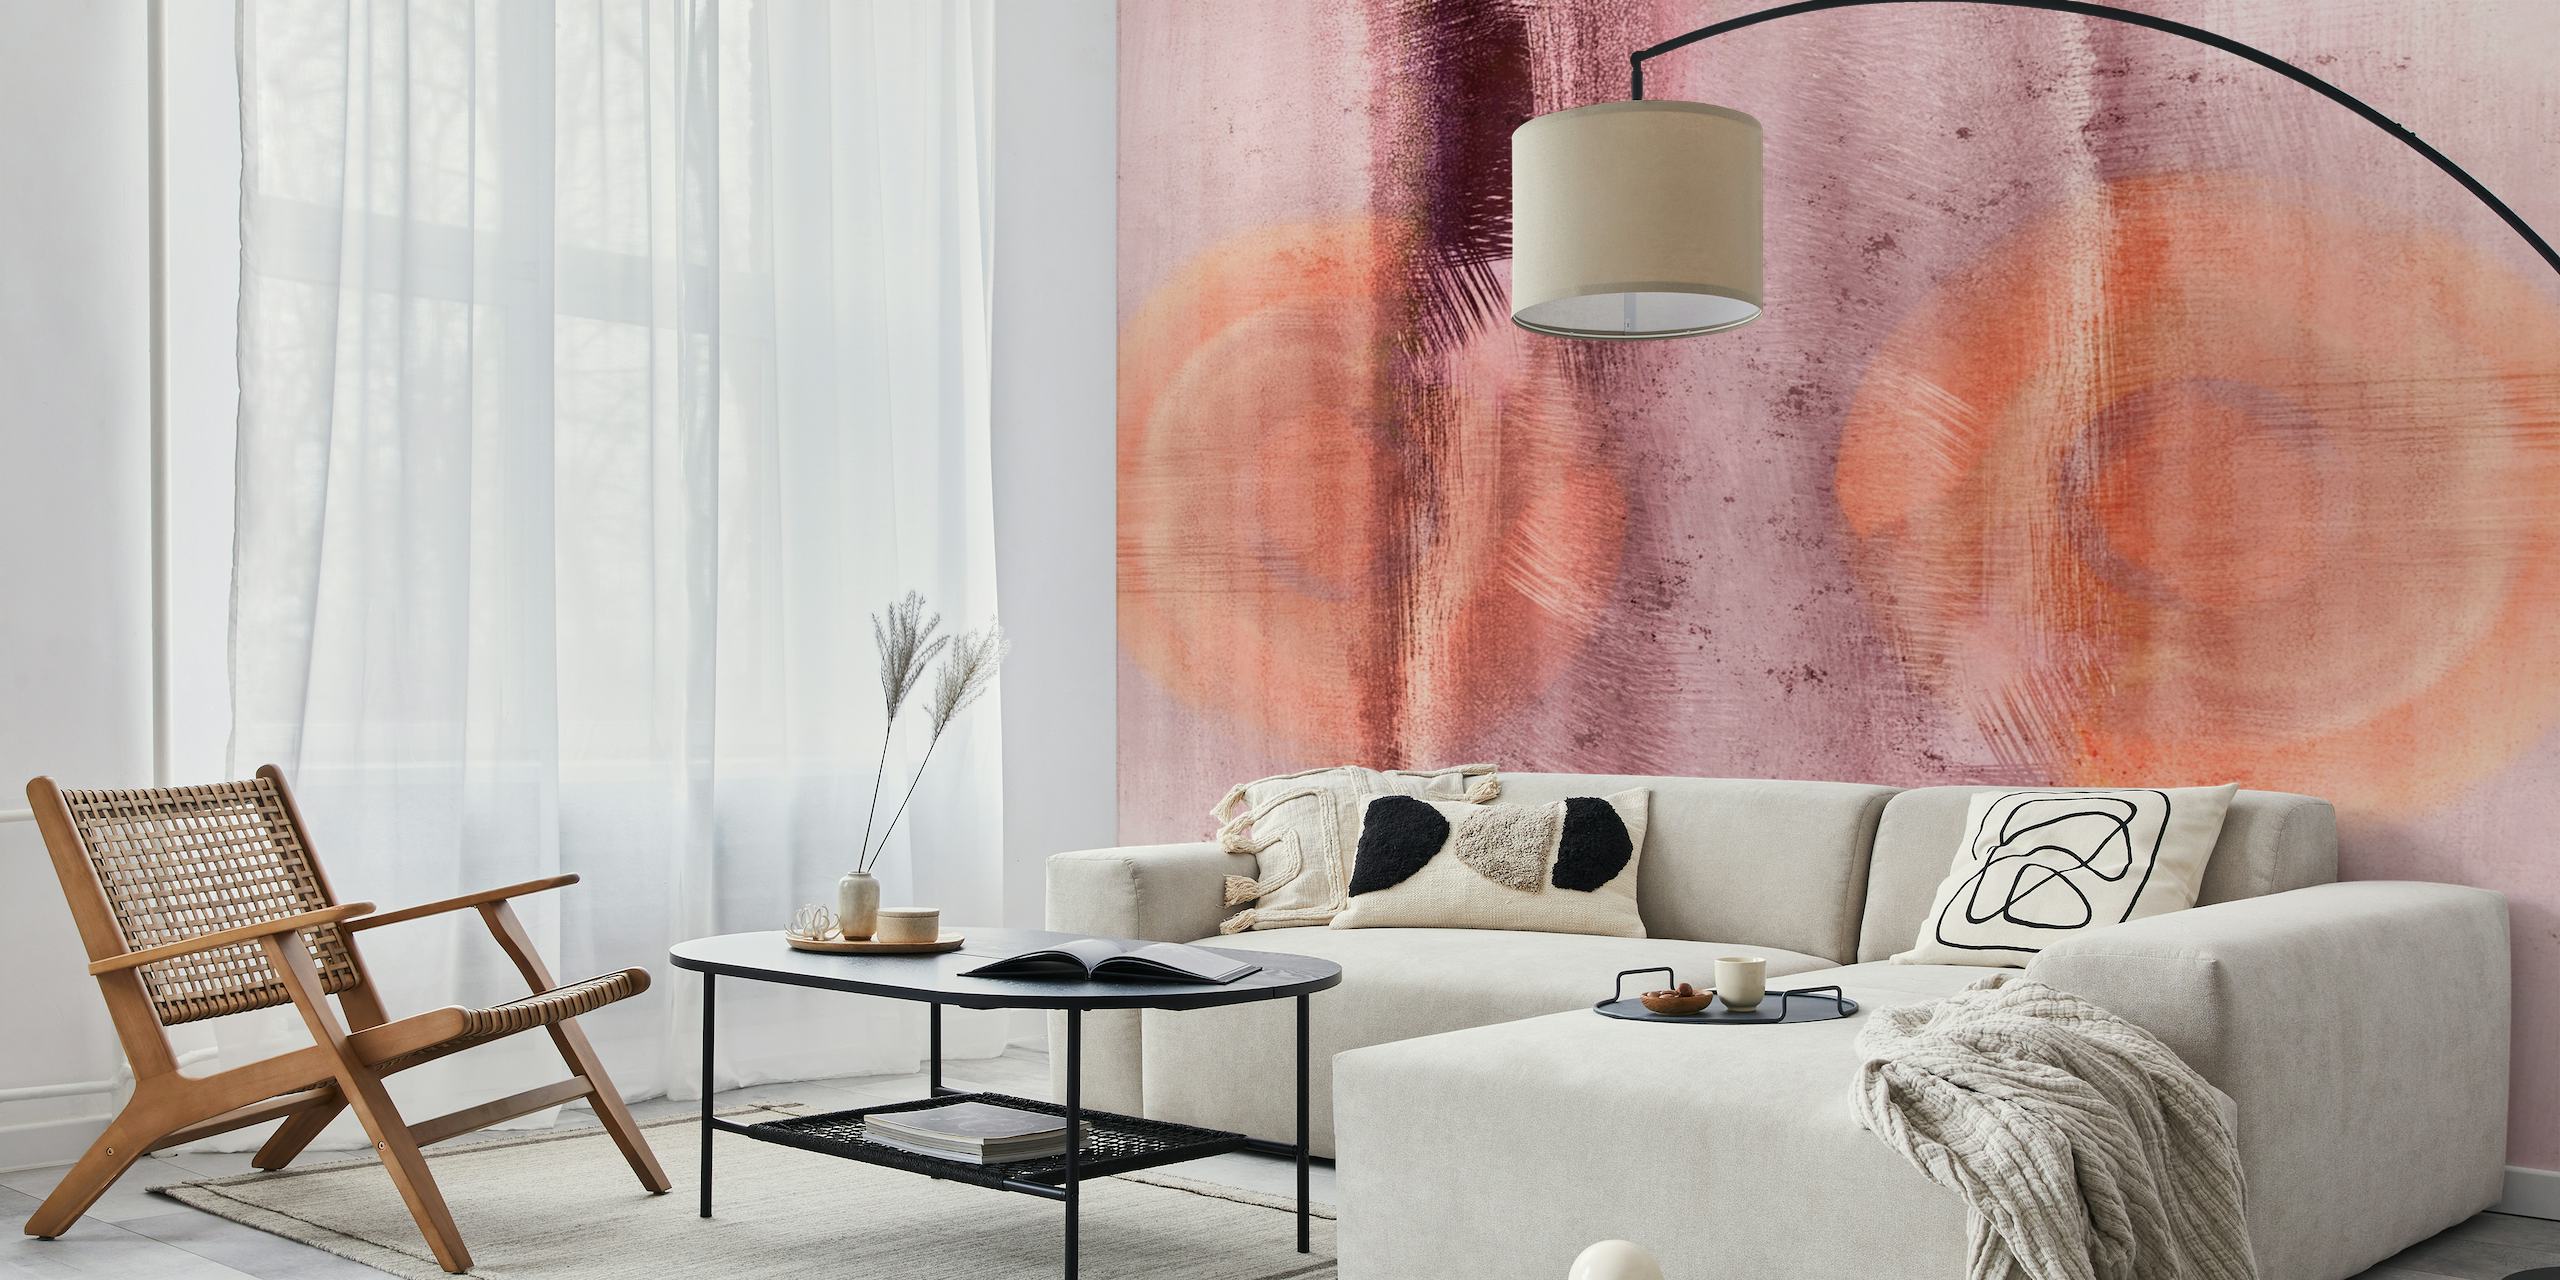 Abstract twin suns wall mural in warm hues on a textured background